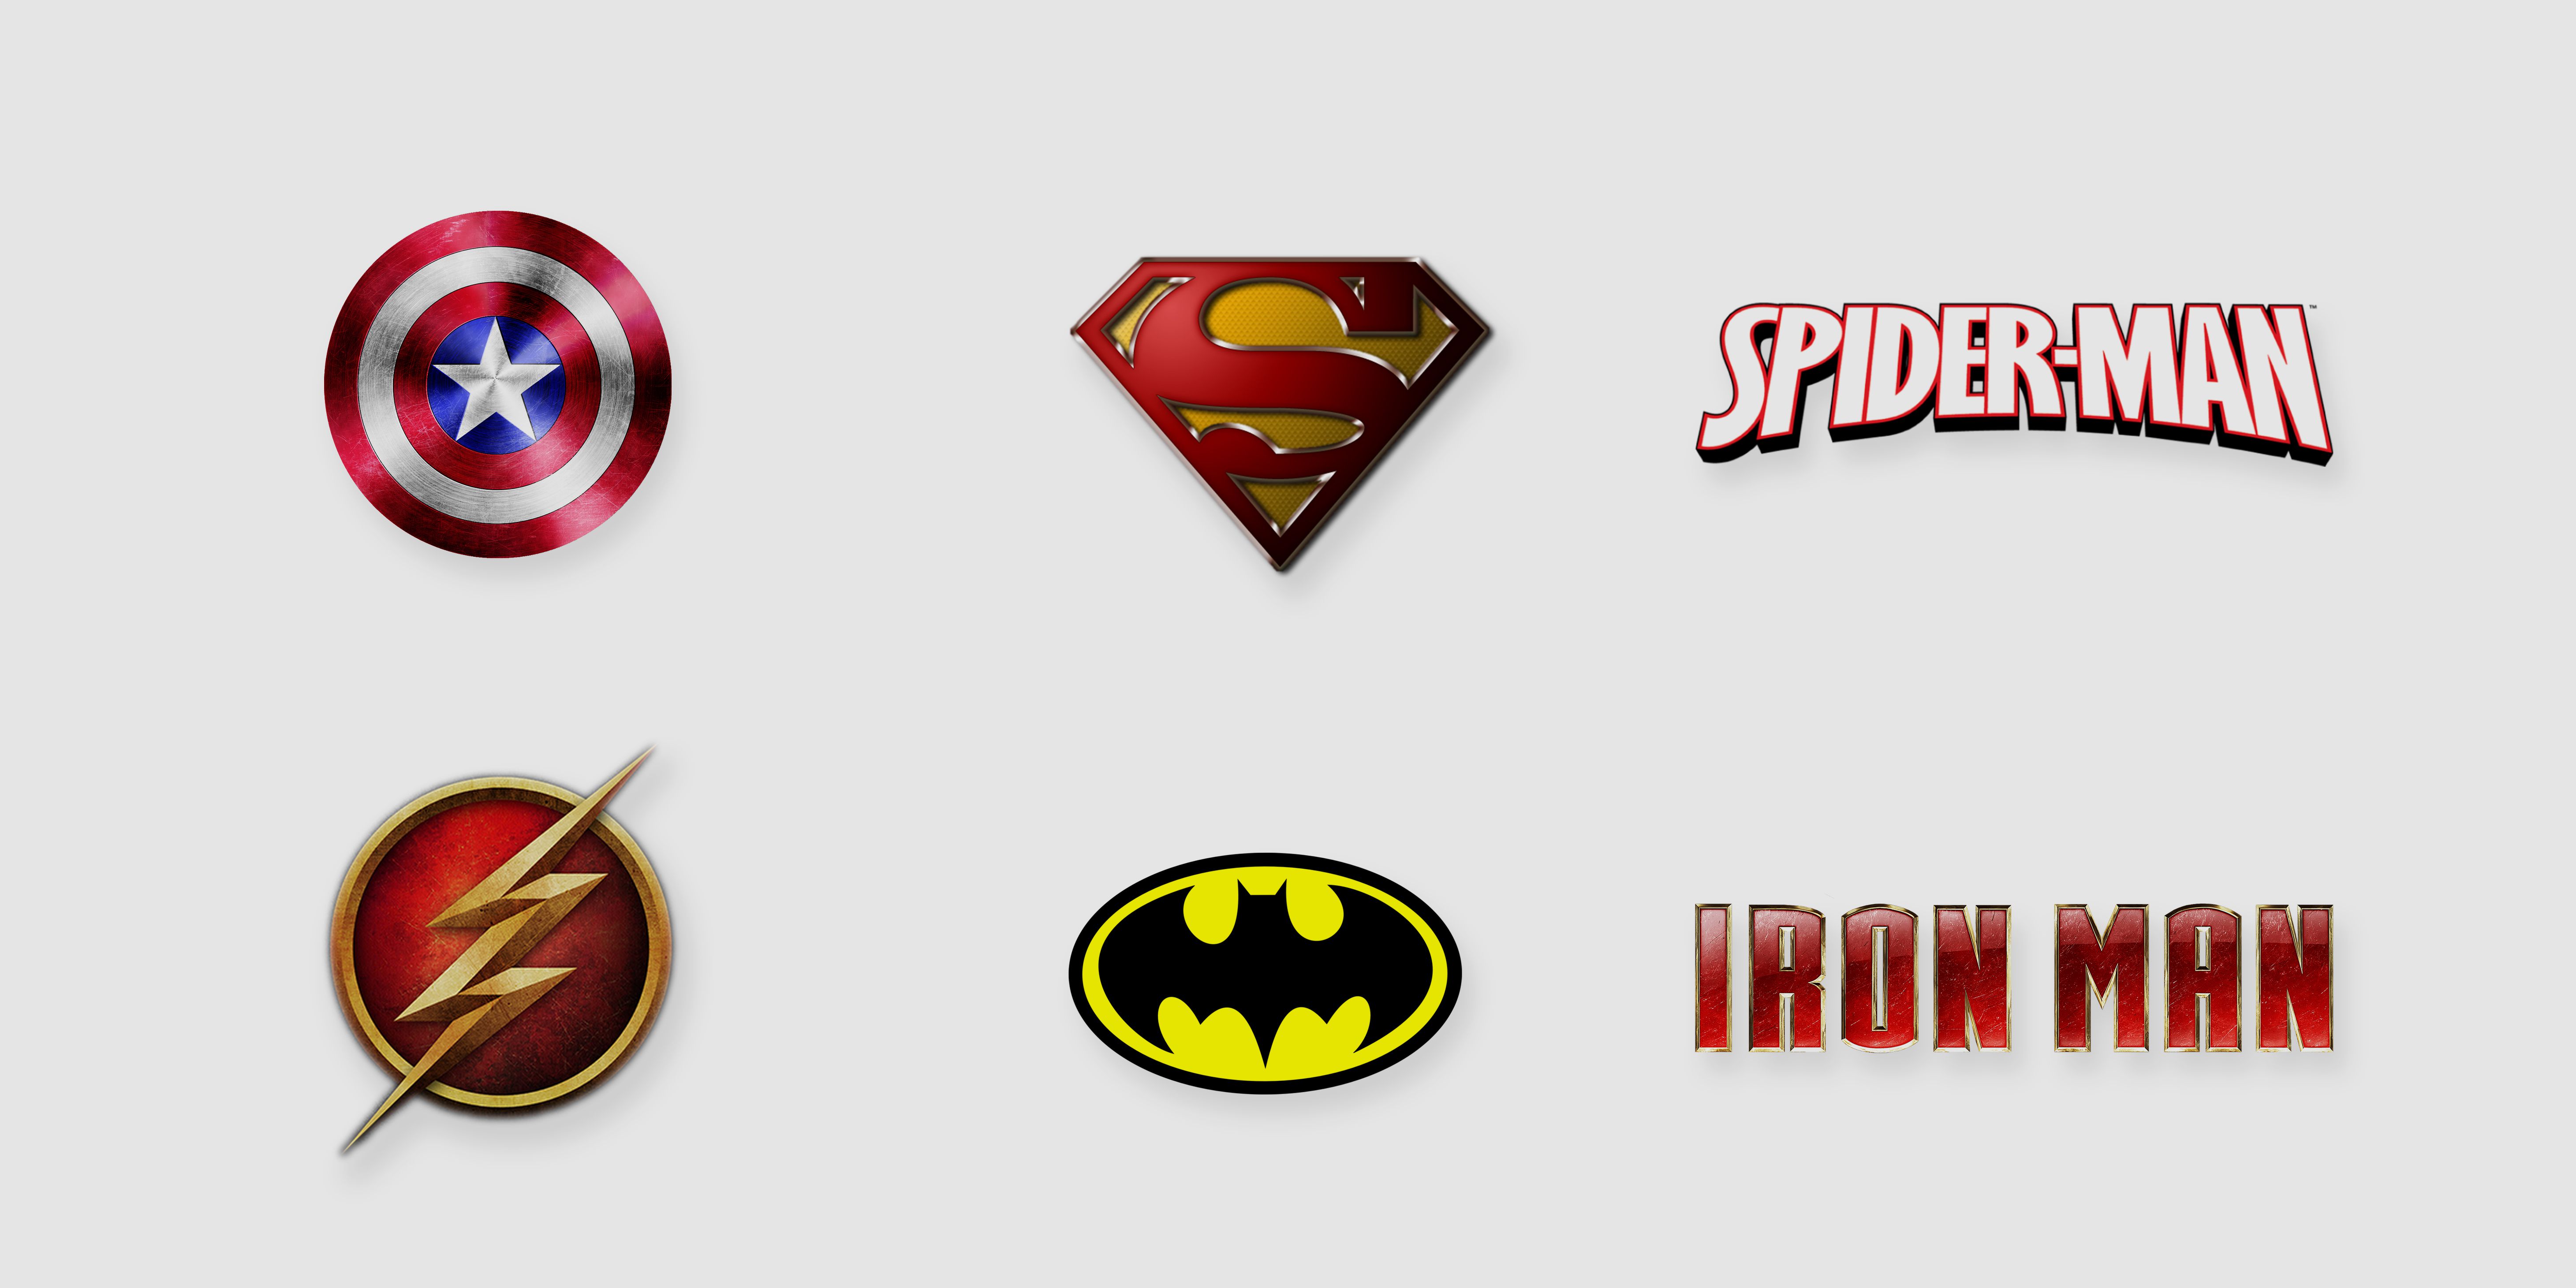 Top 20 Of The World Most Famous Superhero Logos Turbo